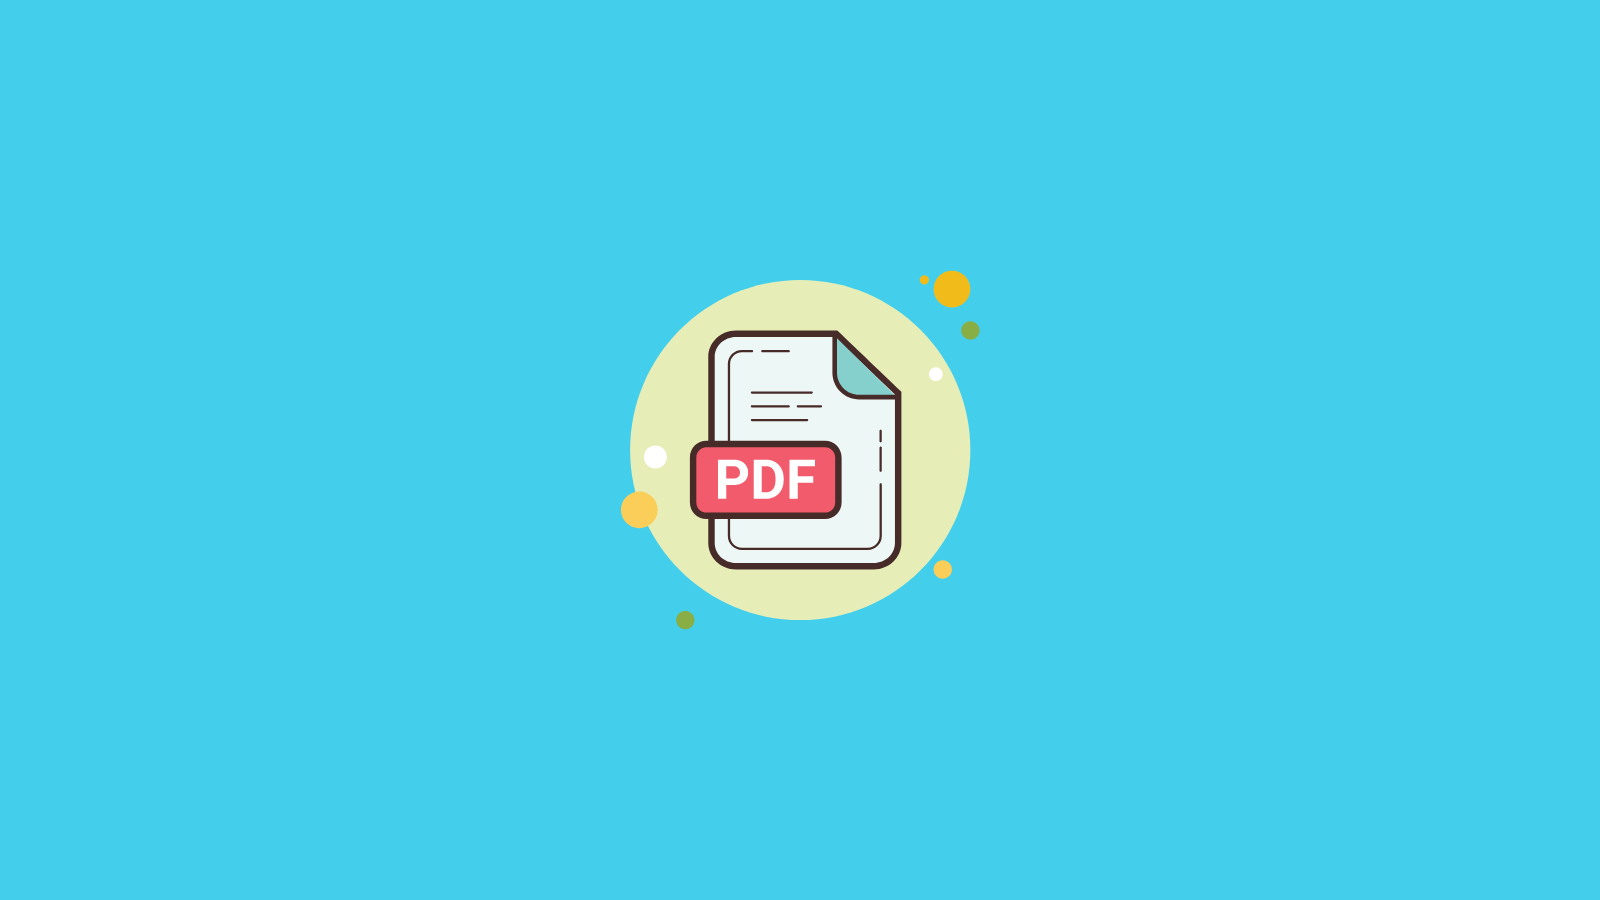 Why Is PDF So Important